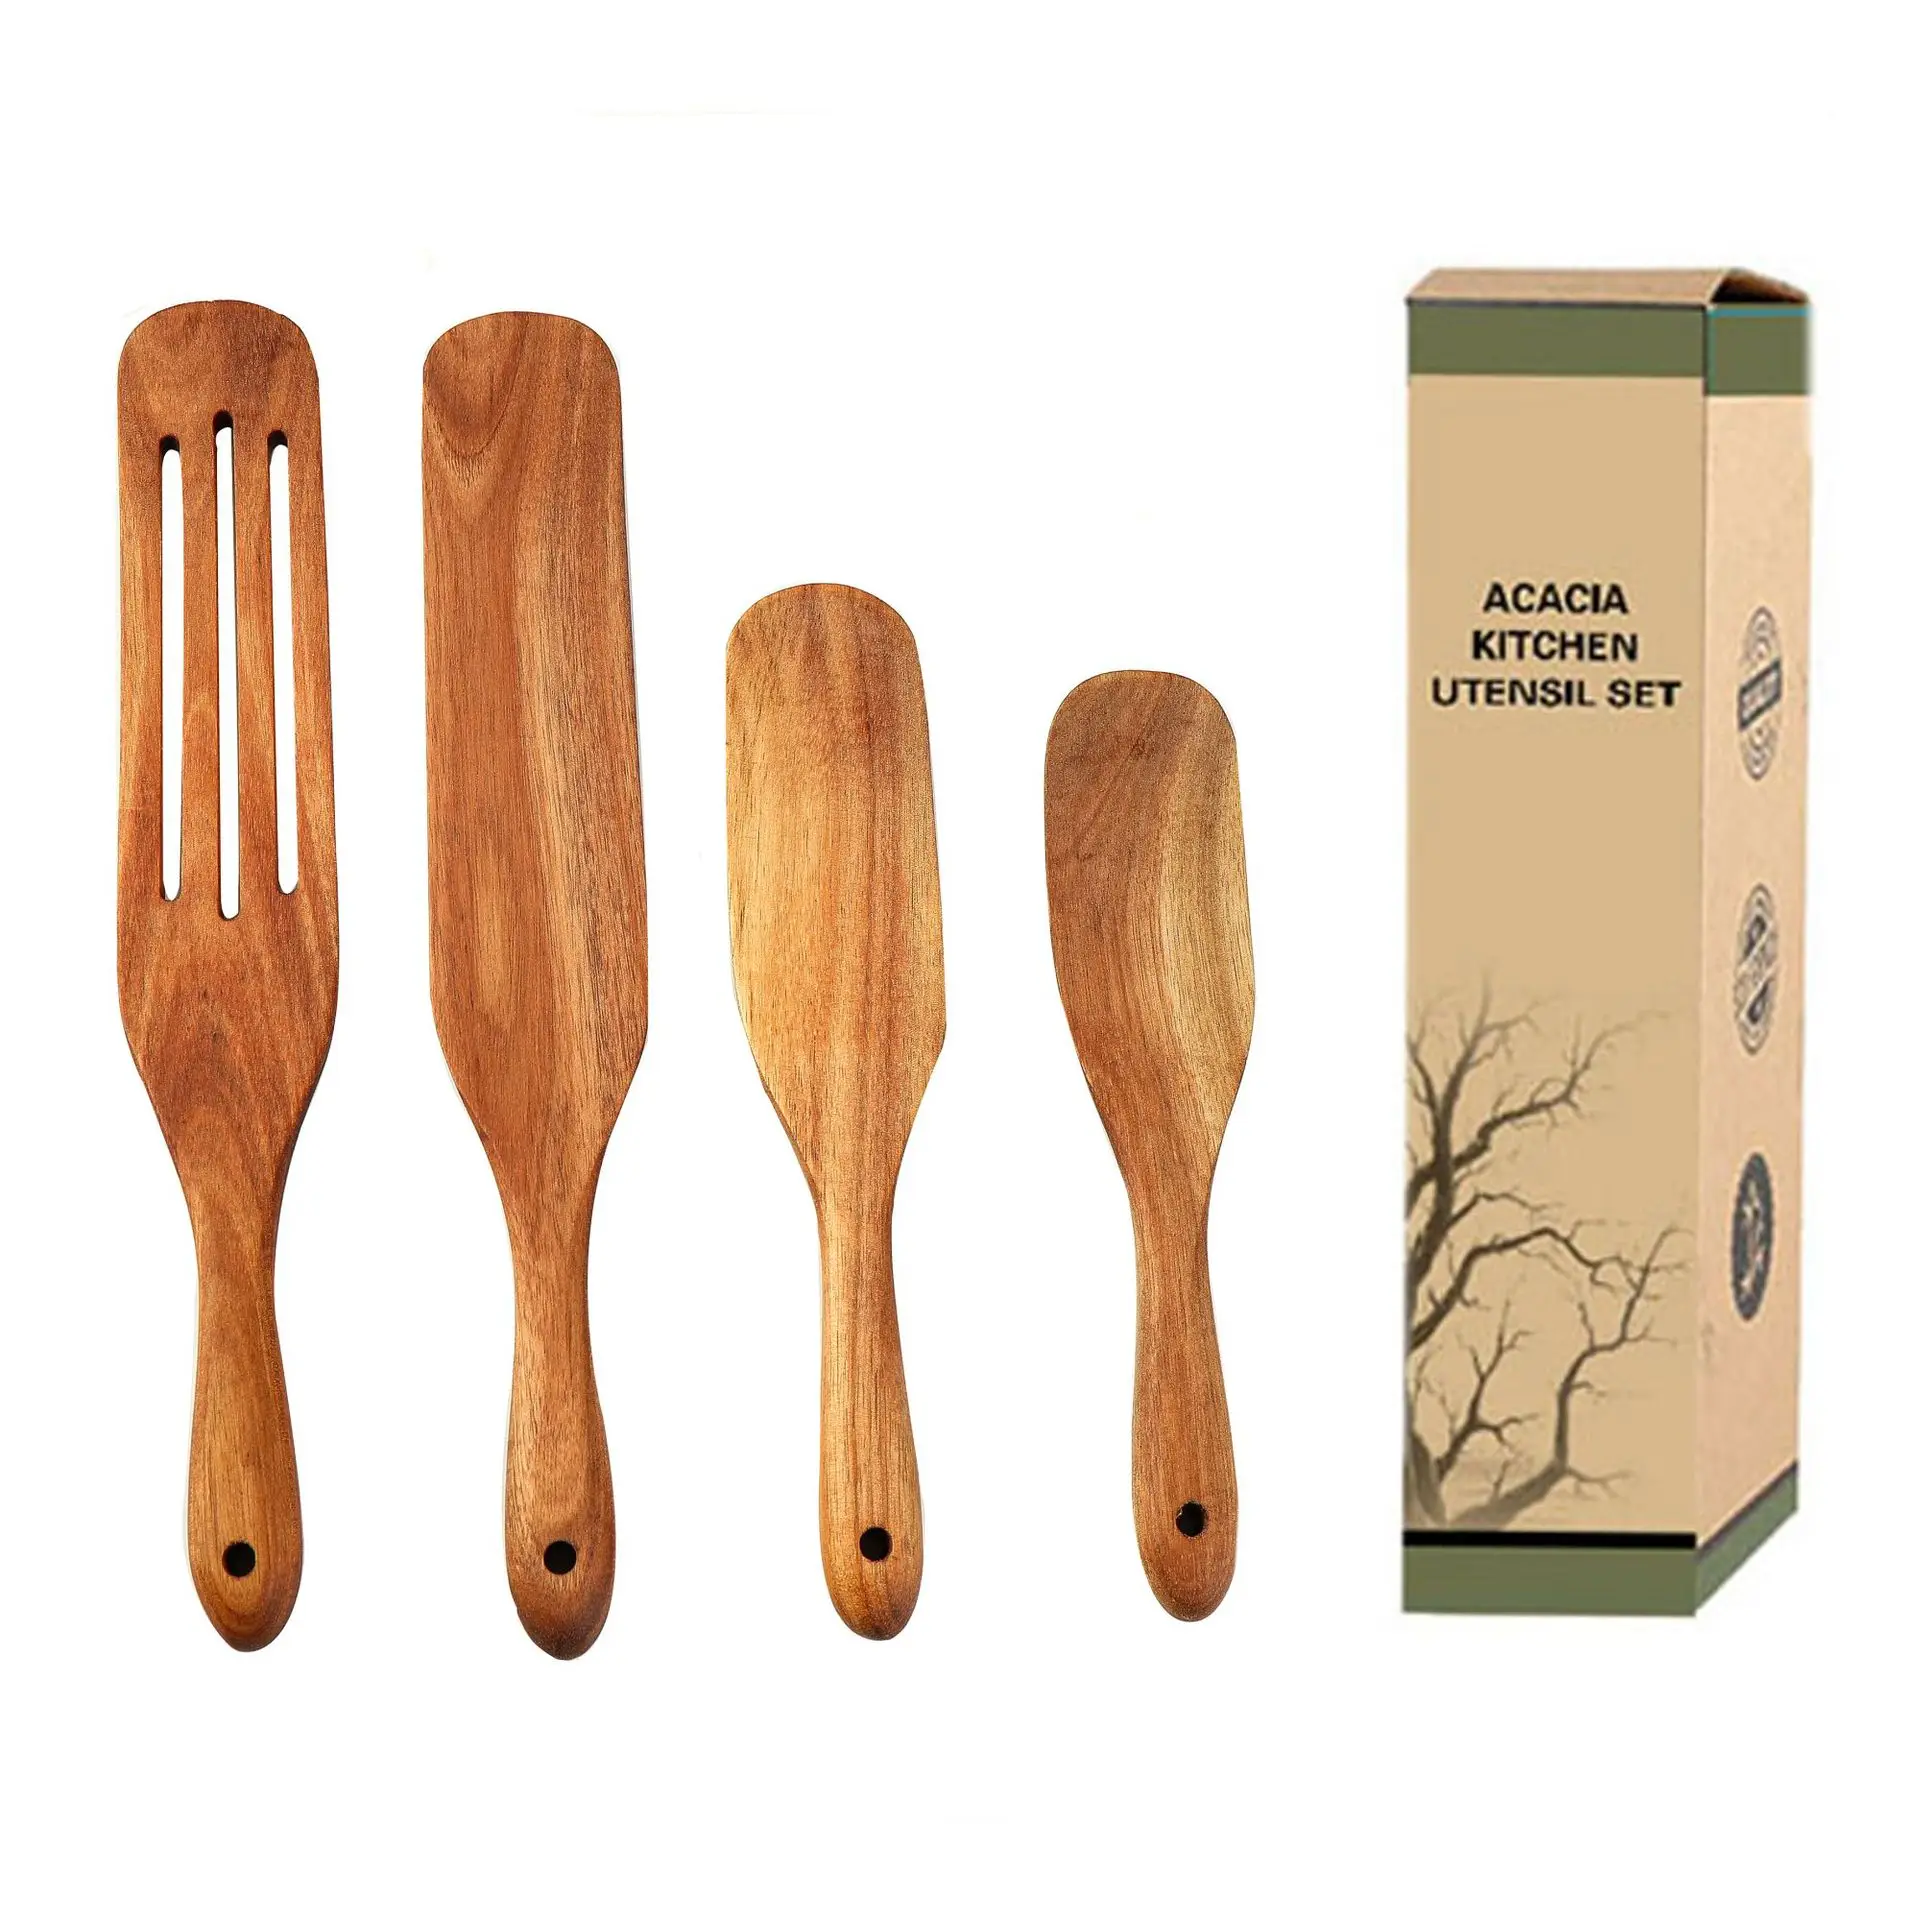 2021 Hot sell Acacia Teak Beech Bamboo Wood with holder Slotted Kitchen tools utensils Wooden Spurtles set